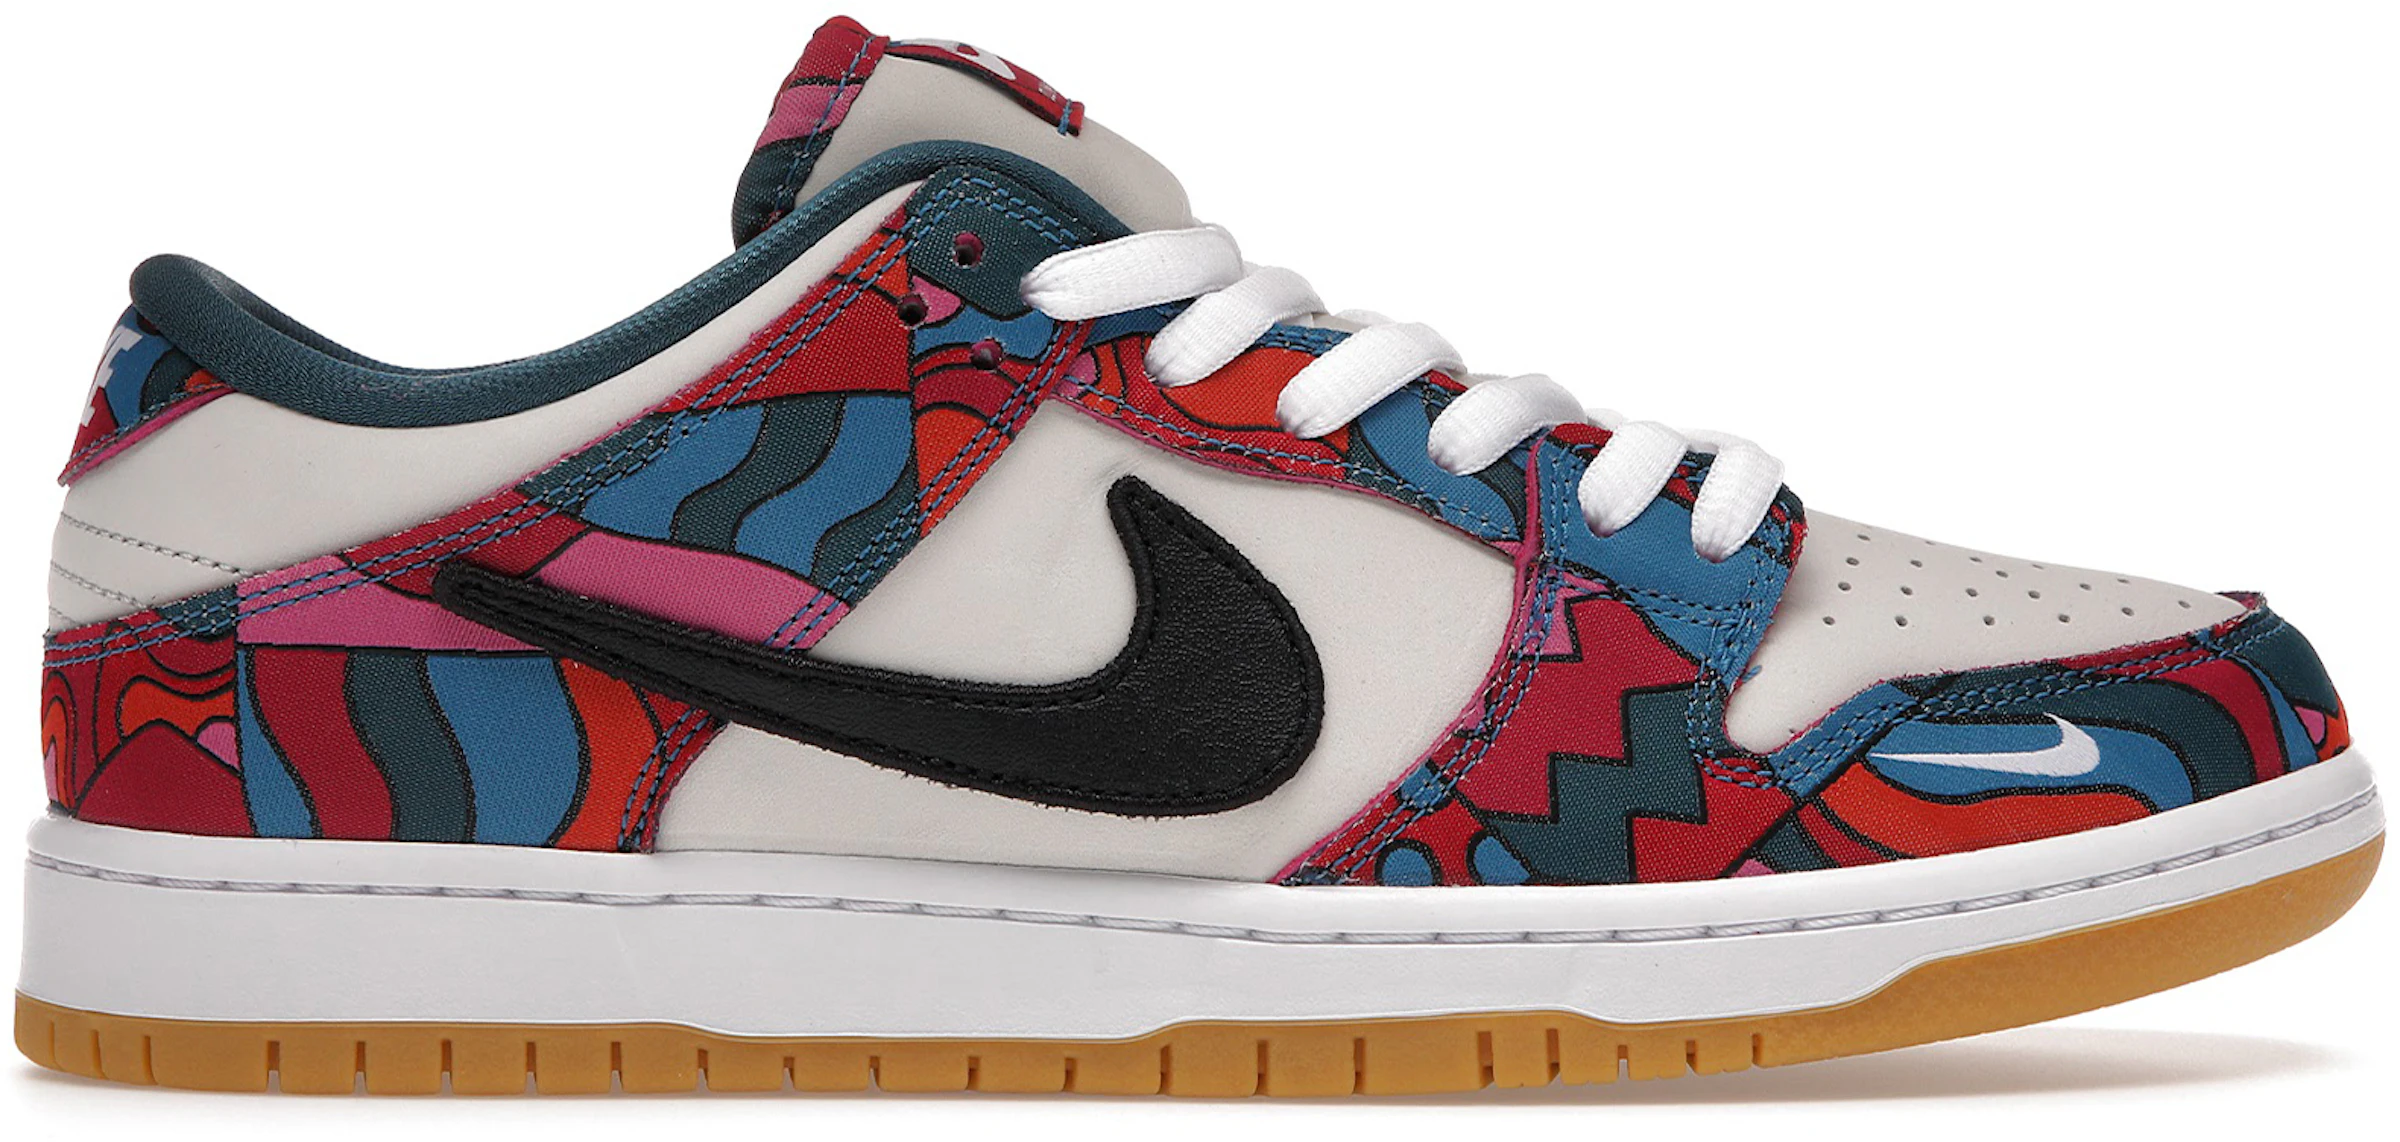 Nike SB Dunk Low Pro Parra Abstract Art - DH7695-600 - US